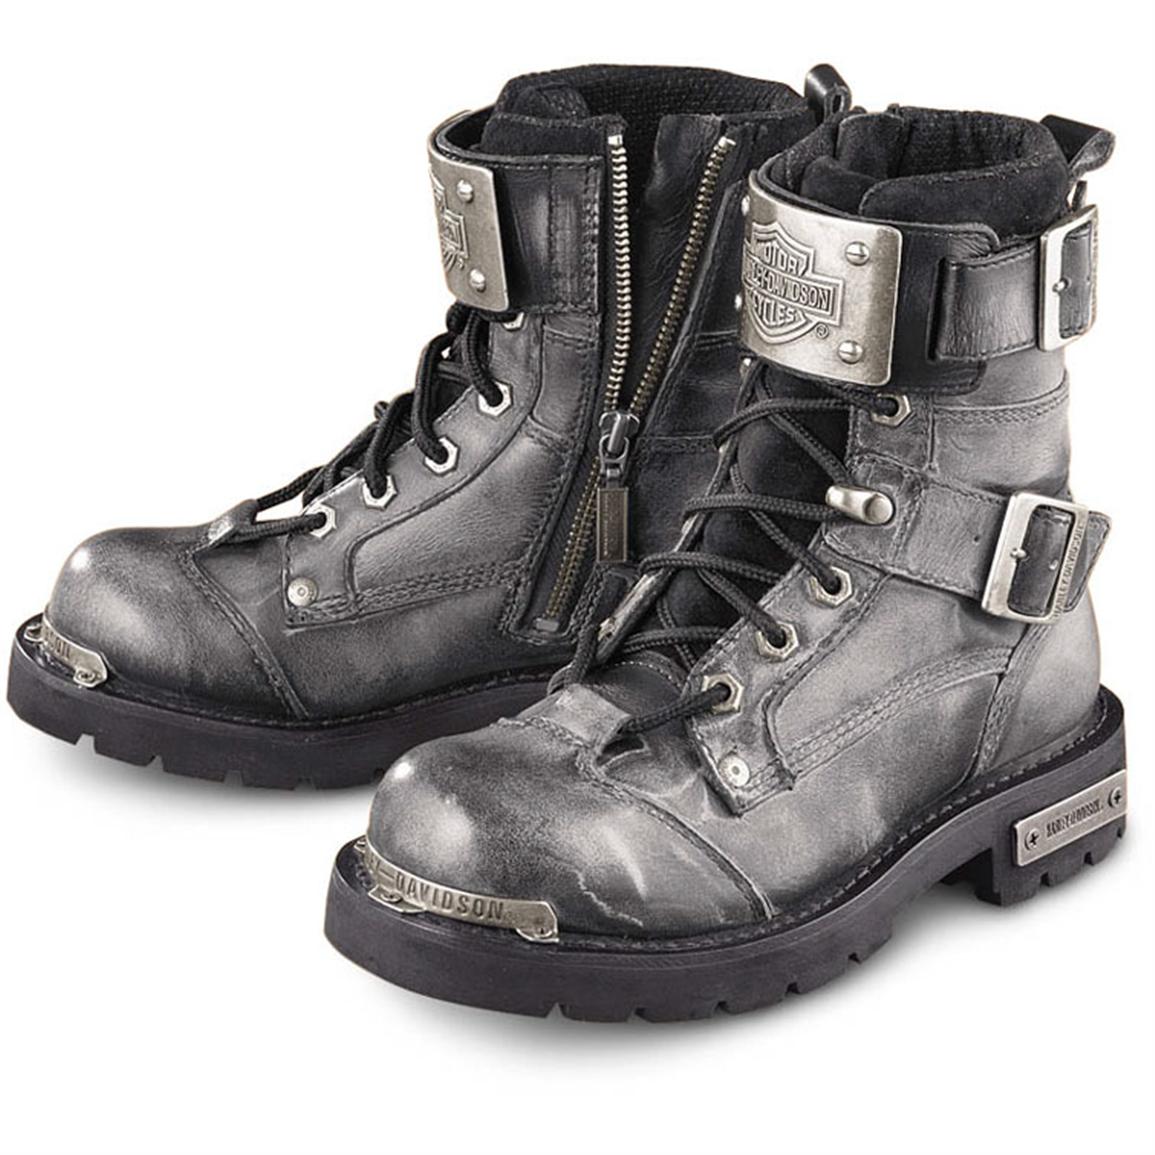 Women S Harley Davidson Night Shift Boots Gray 80236 Casual Shoes At Sportsman S Guide